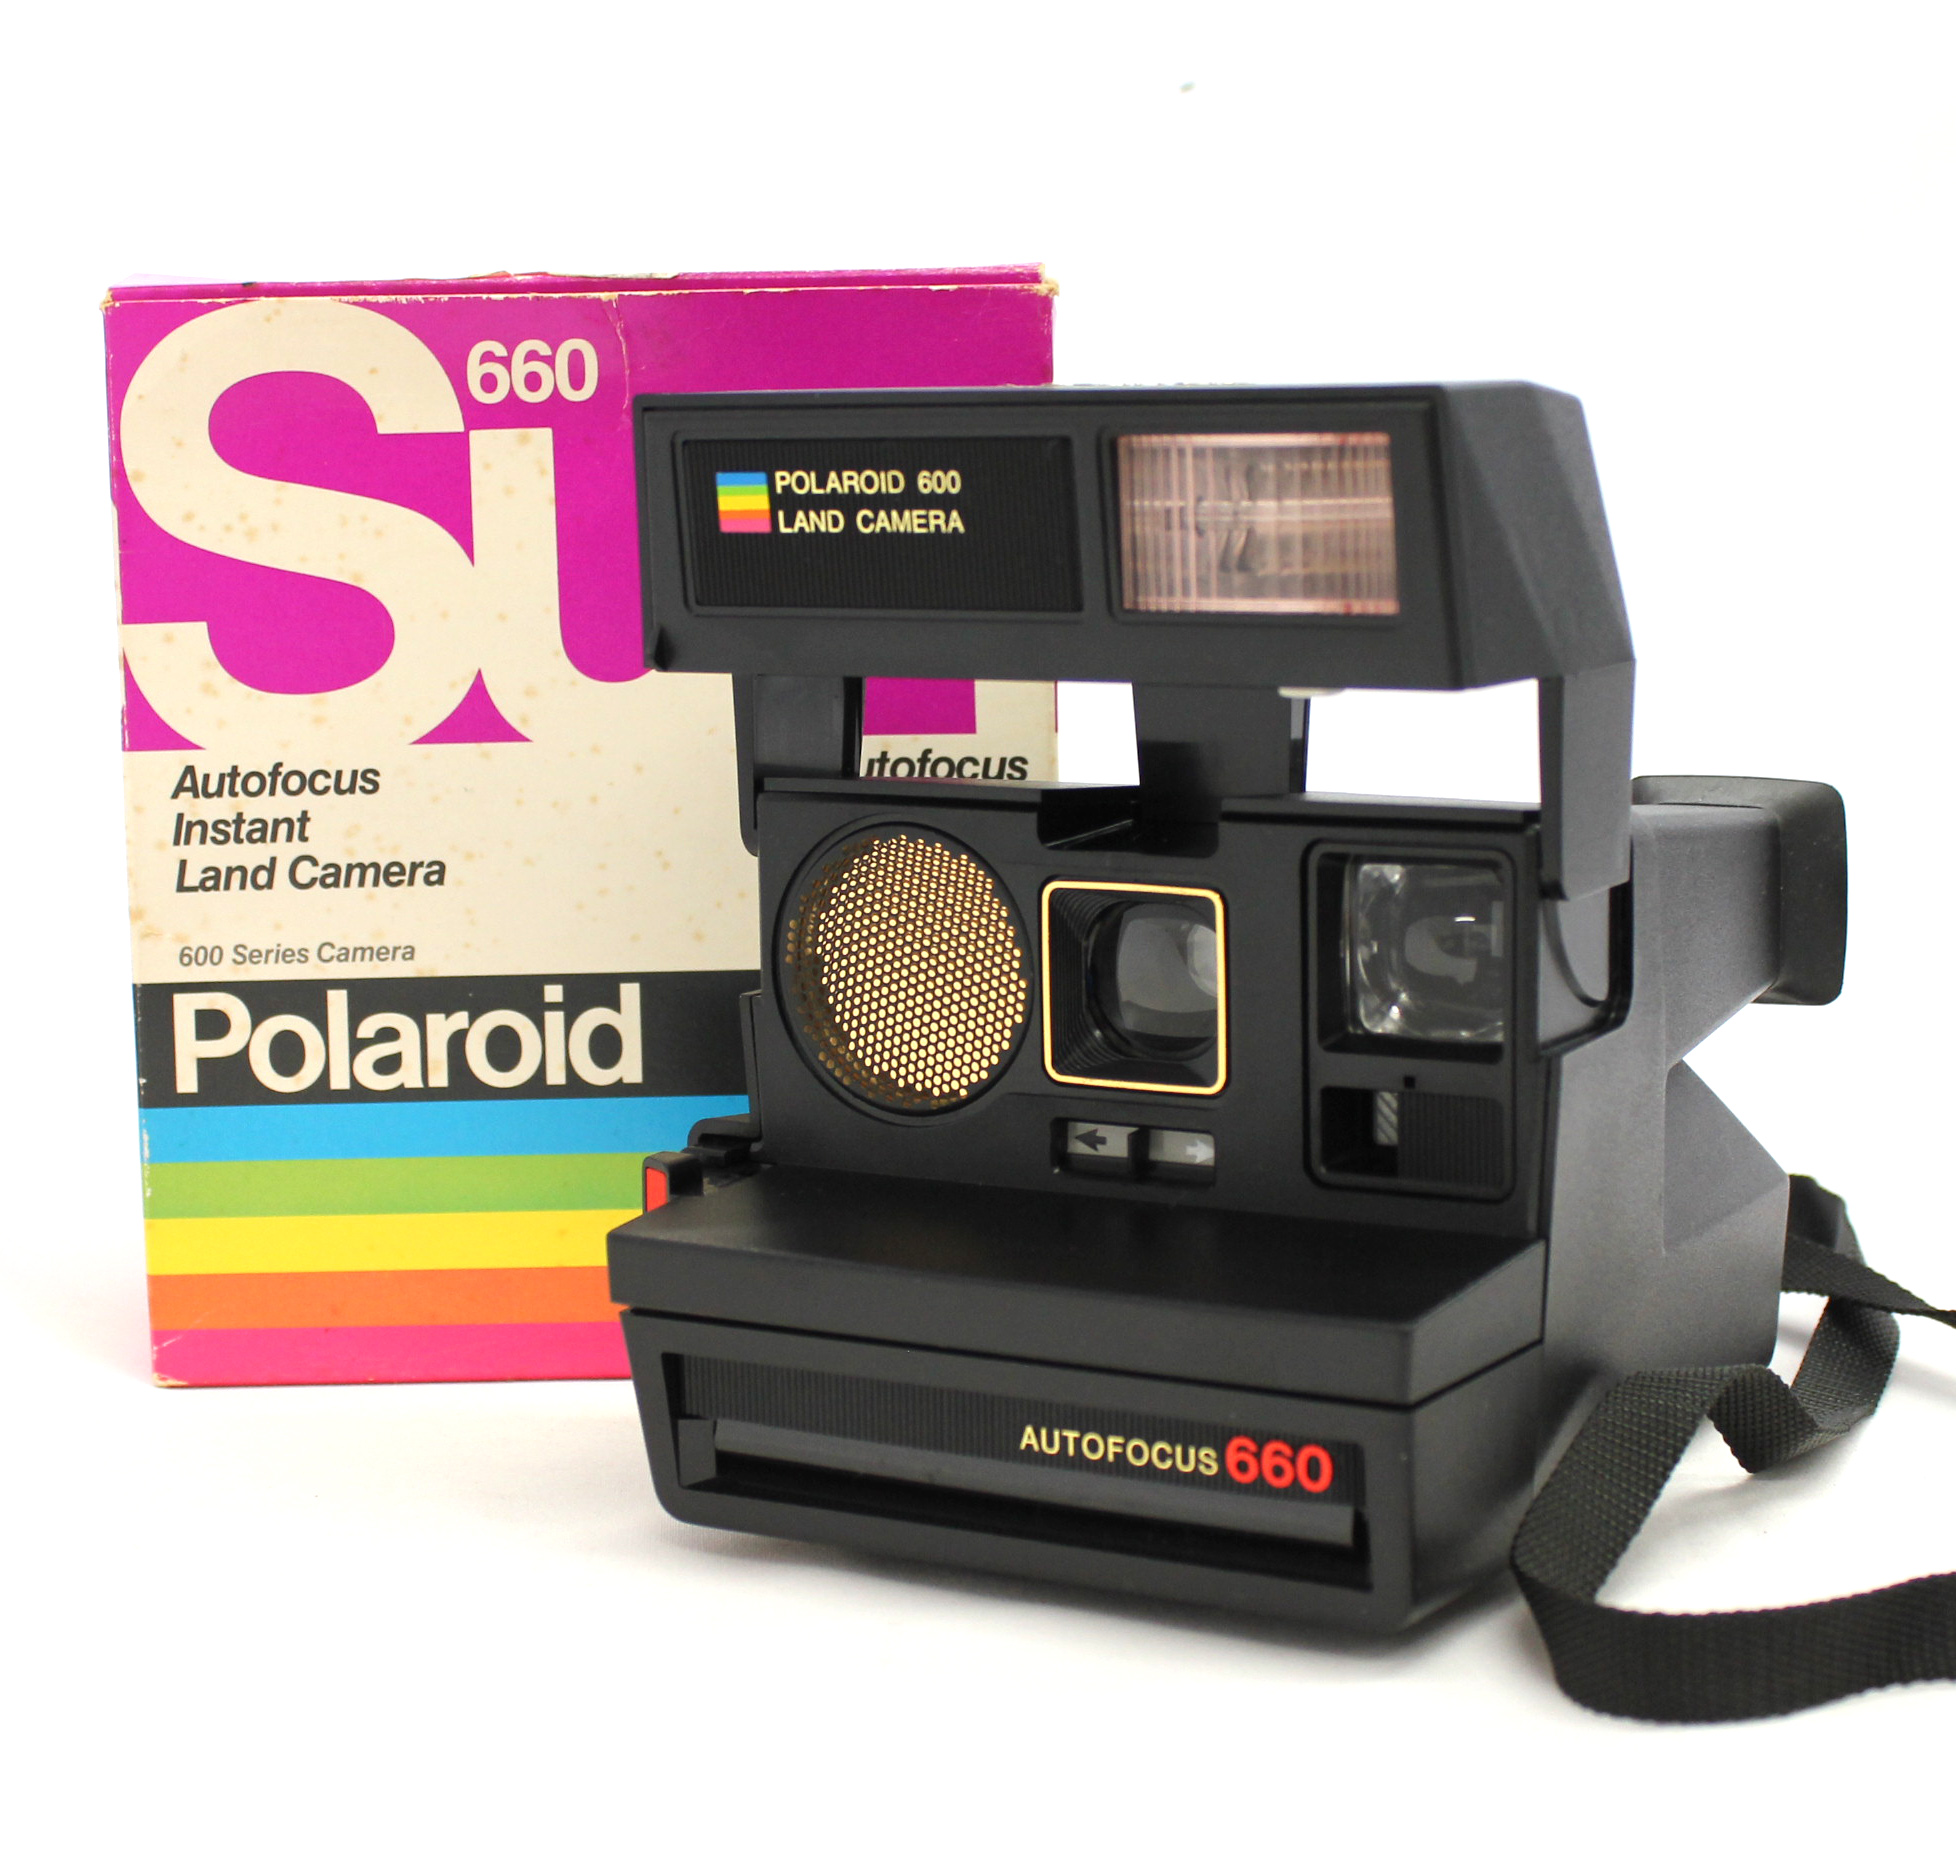 Japan Used Camera Shop | [Near Mint] Polaroid Sun 660 AF Autofocus Instant Land Camera in Box from Japan